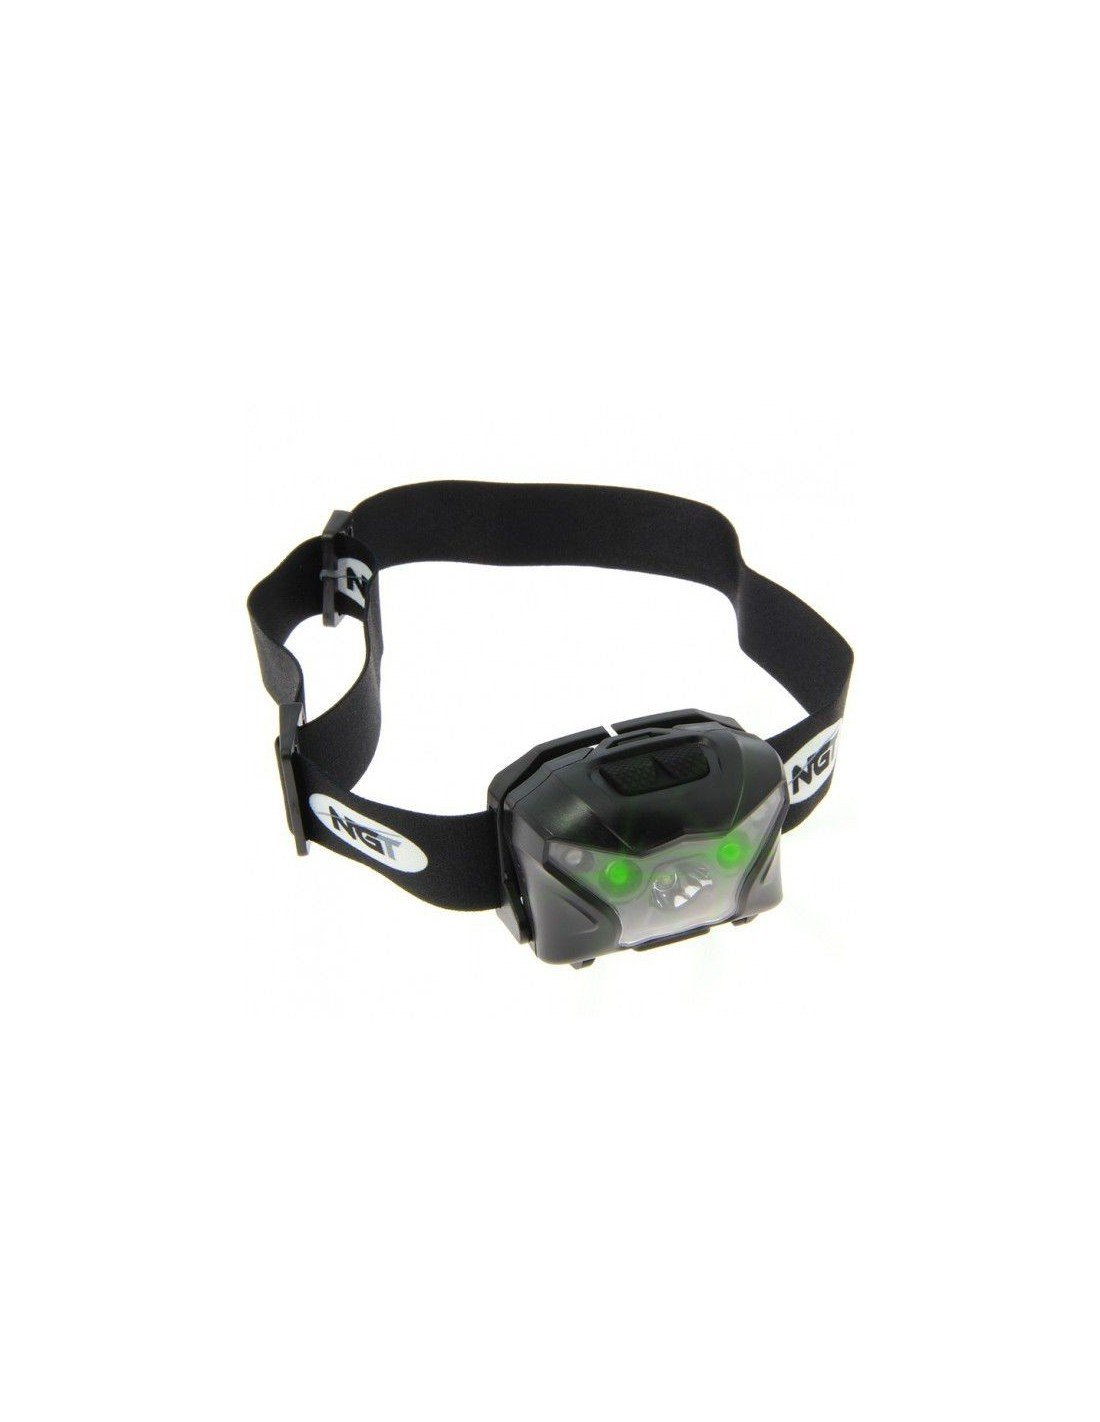 NGT XPR USB Rechargeable Headlamp челник